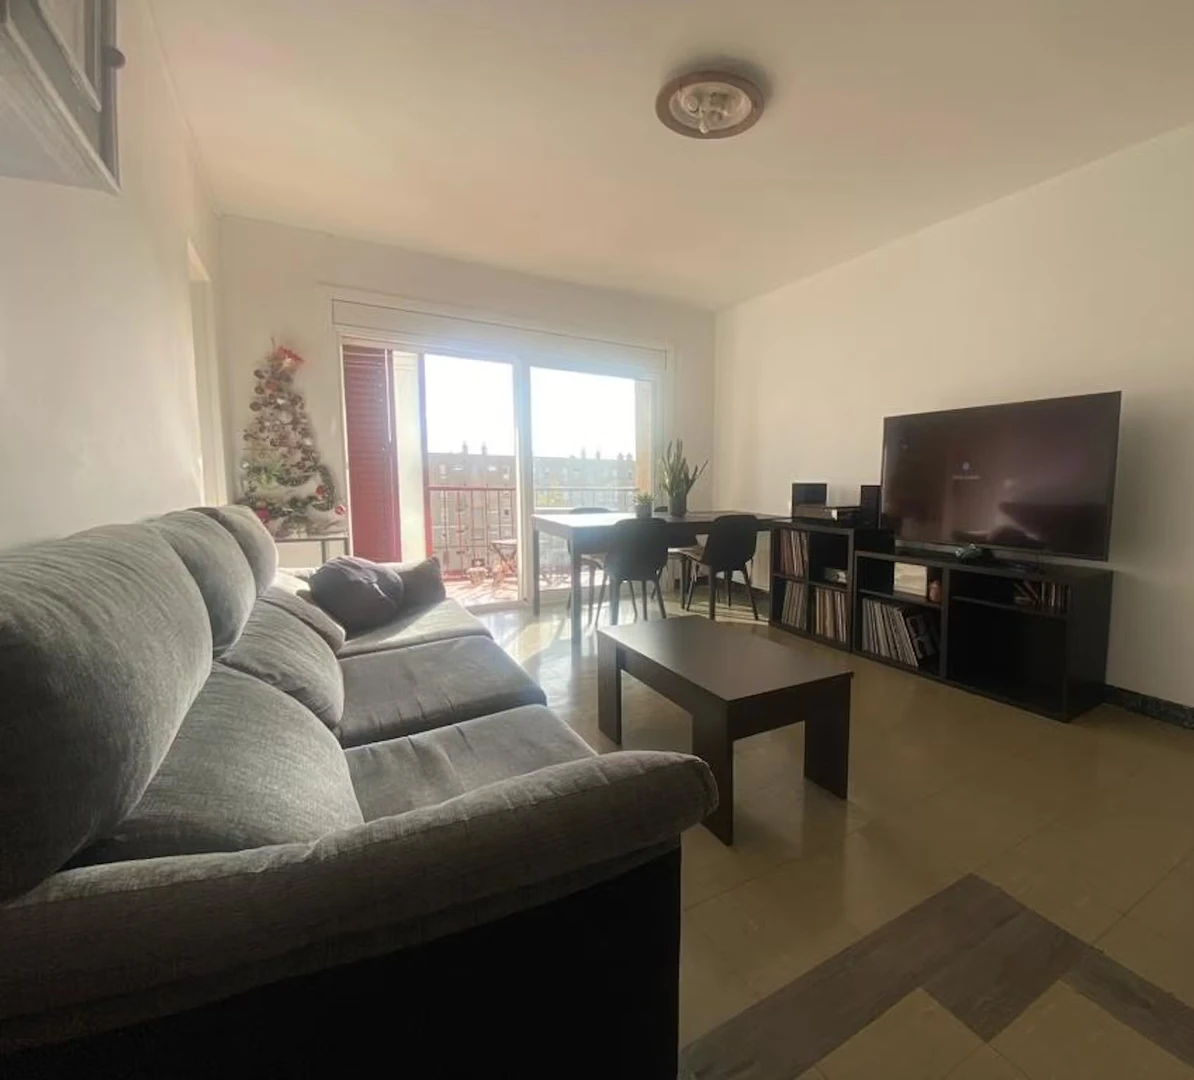 Bright private room in Sabadell